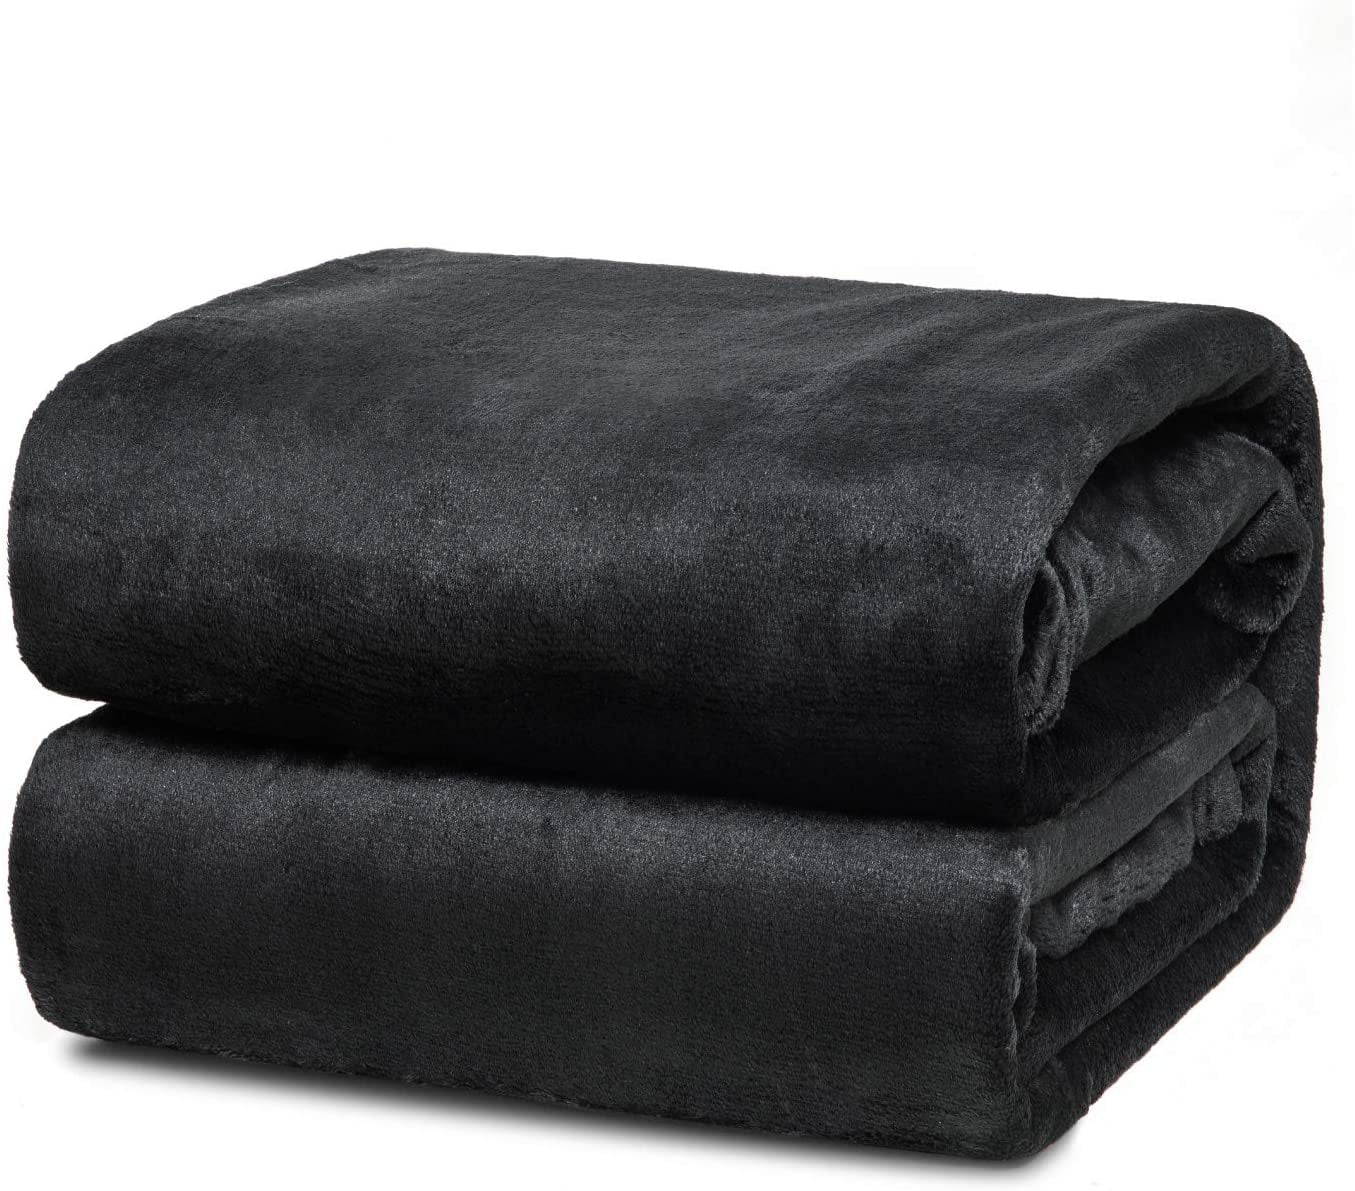 QUEEN Gray Lightweight Breathable Cotton Blanket Details about   Better Homes & Gardens FULL 